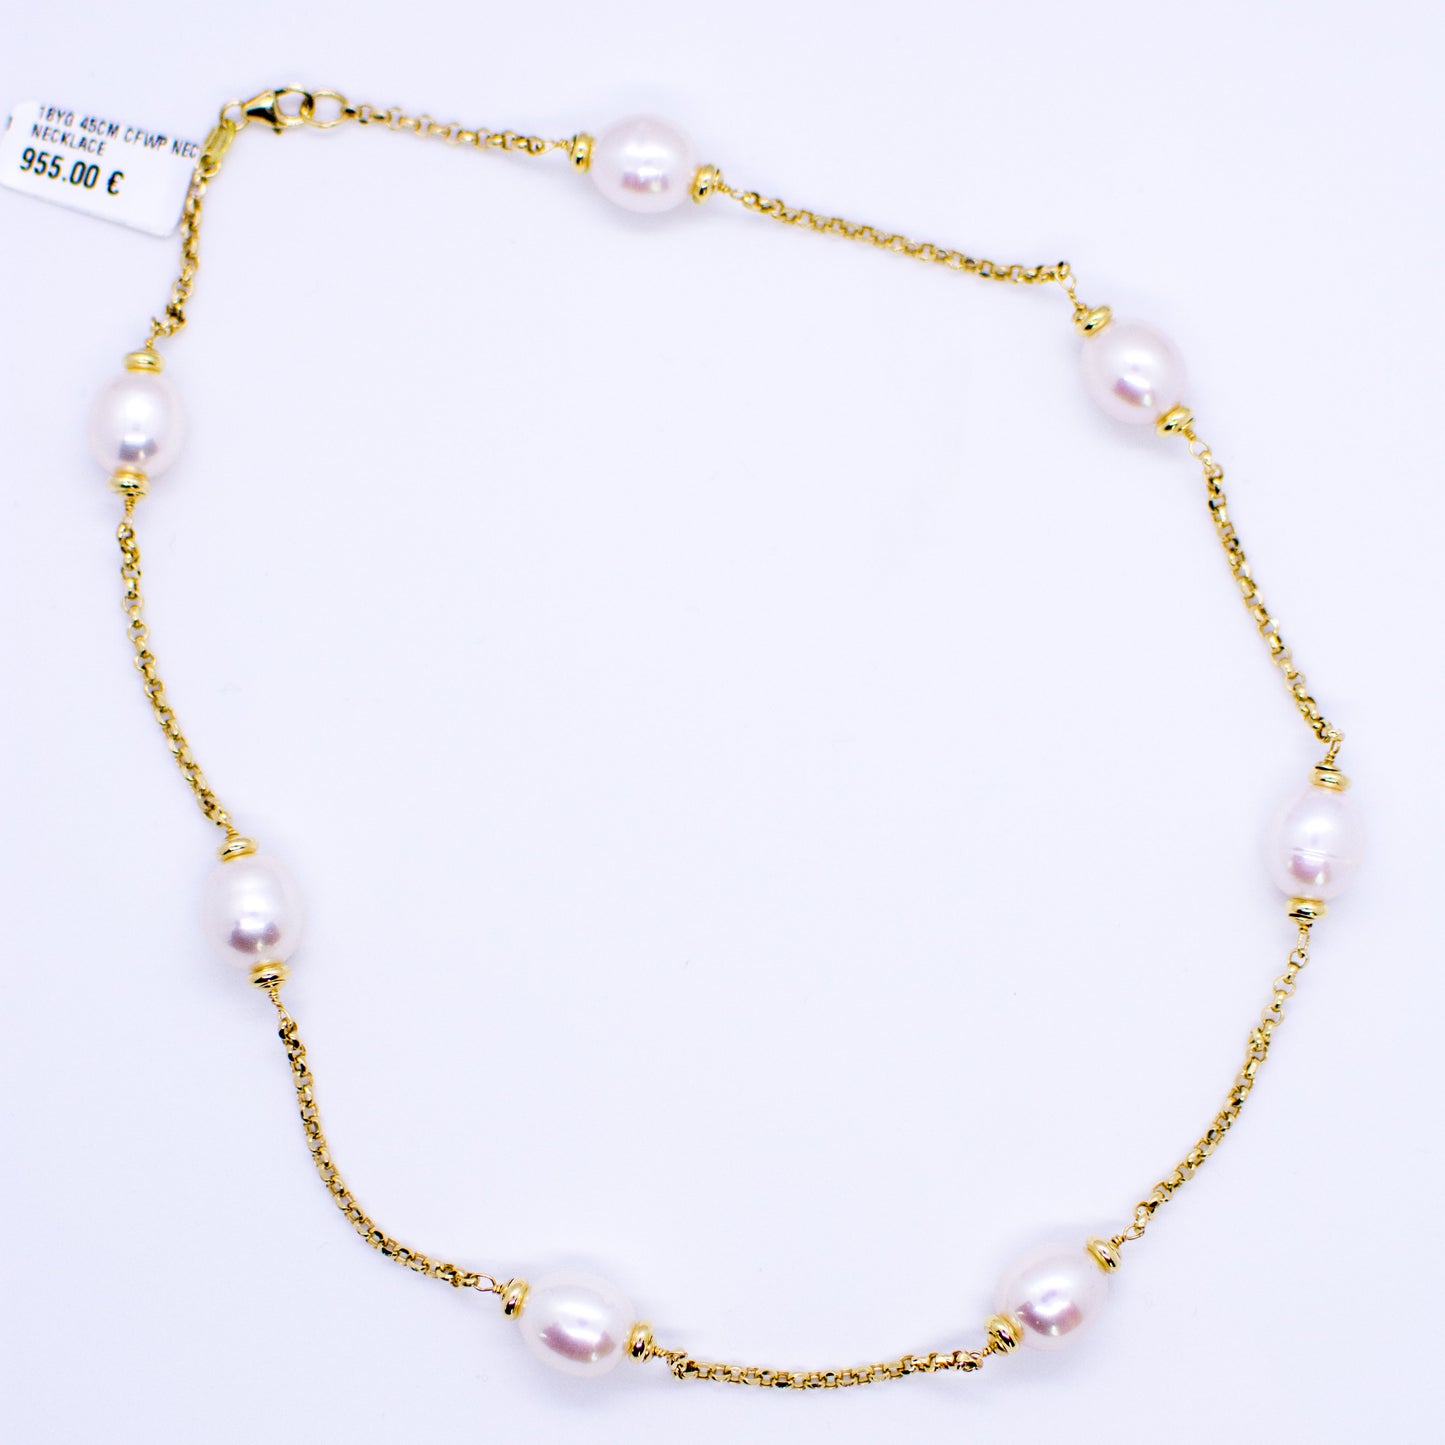 18ct Gold Cultured Freshwater Pearl and Chain Necklace Pearl dimensions: 10mm x 12mm approximately Diamond cut 2mm gauge solid trace chain 45cm long 18ct yellow gold This item can be ordered in a variety of lengths.  Please contact us for custom requirements.